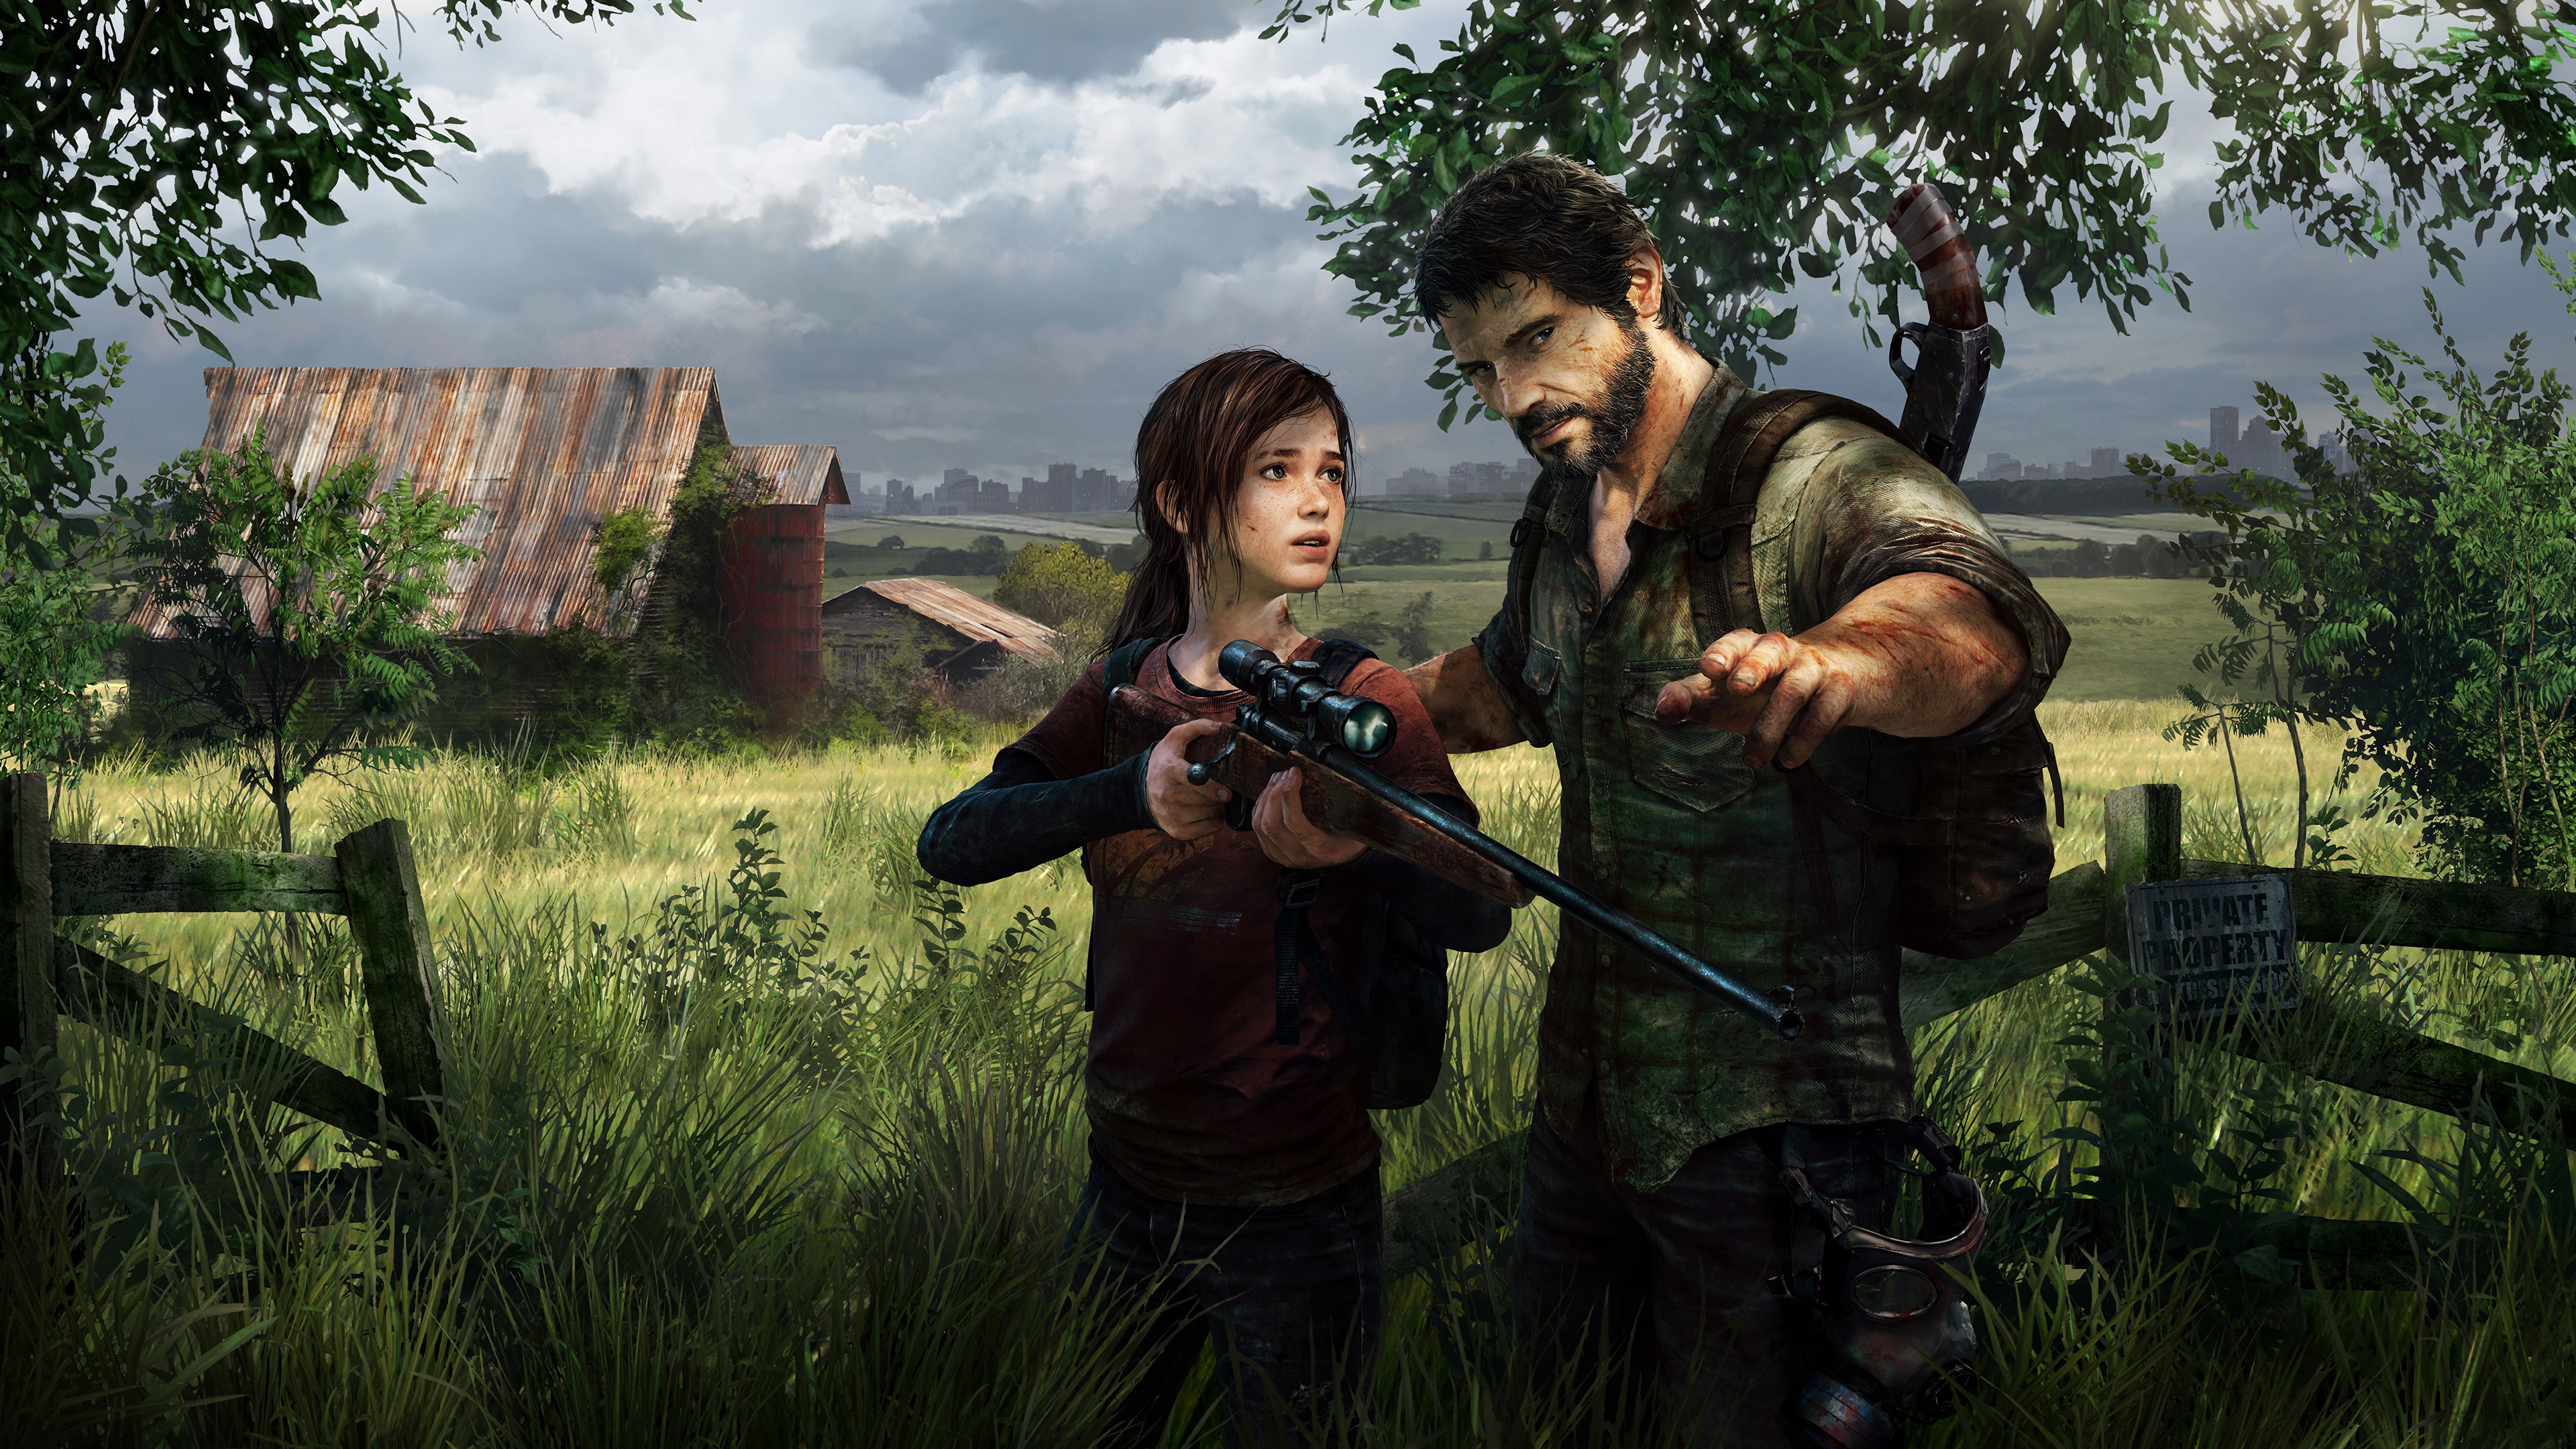 The Last of Us Game for 3840 x 2160 Ultra HD resolution